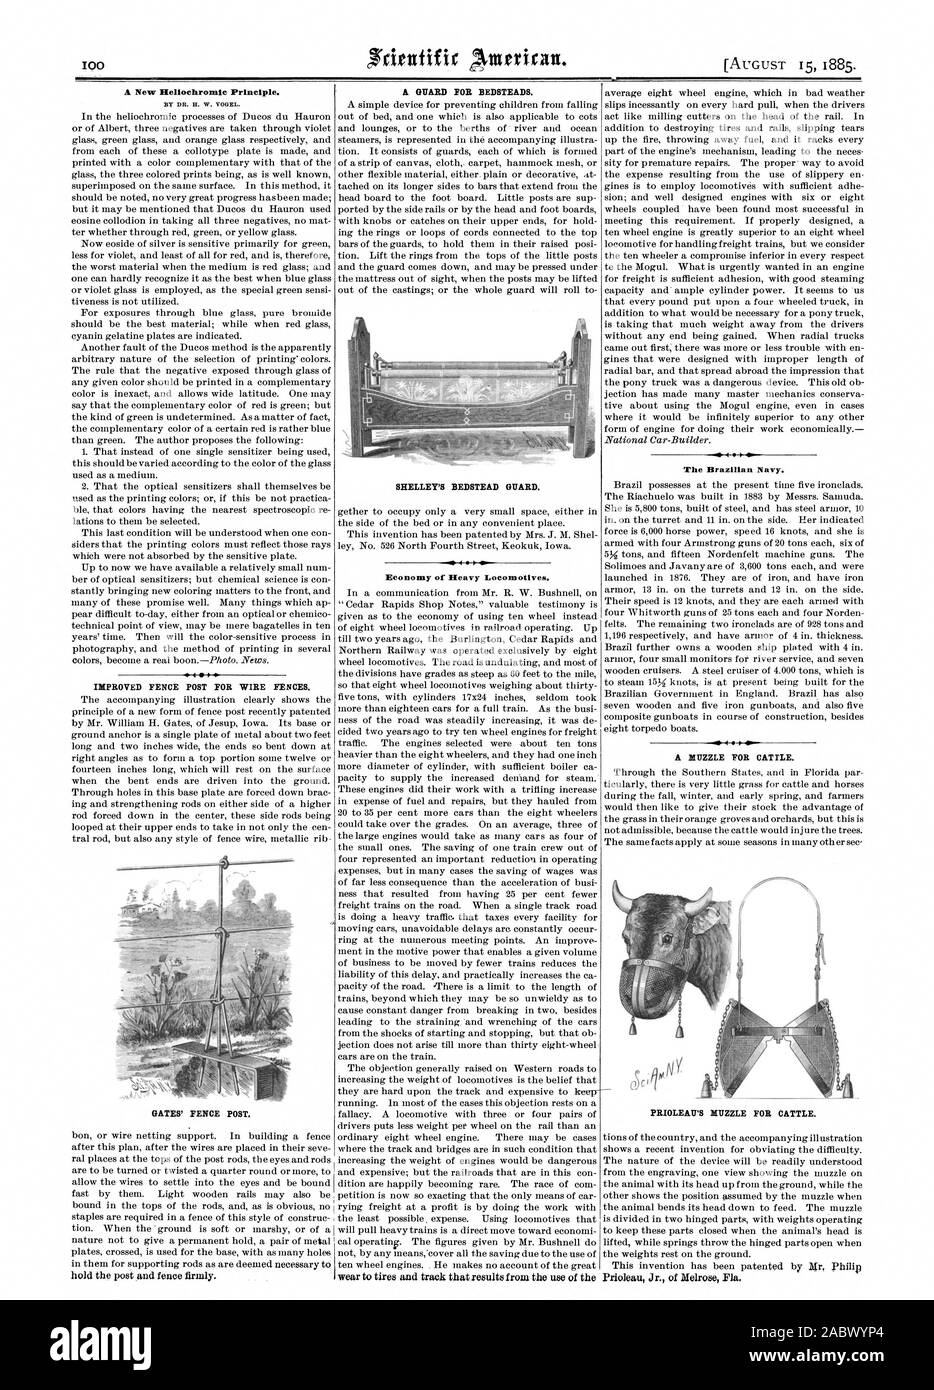 BY DR. IL W. VOGEL. 4.-4 IMPROVED FENCE POST FOR WIRE FENCES. GATES' FENCE POST. SHELLEY'S BEDSTEAD GUARD. Economy of Heavy Locomotives. The Brazilian Navy. A MUZZLE FOR CATTLE. PRIOLEA17'S MUZZLE FOR CATTLE., scientific american, 1885-08-15 Stock Photo